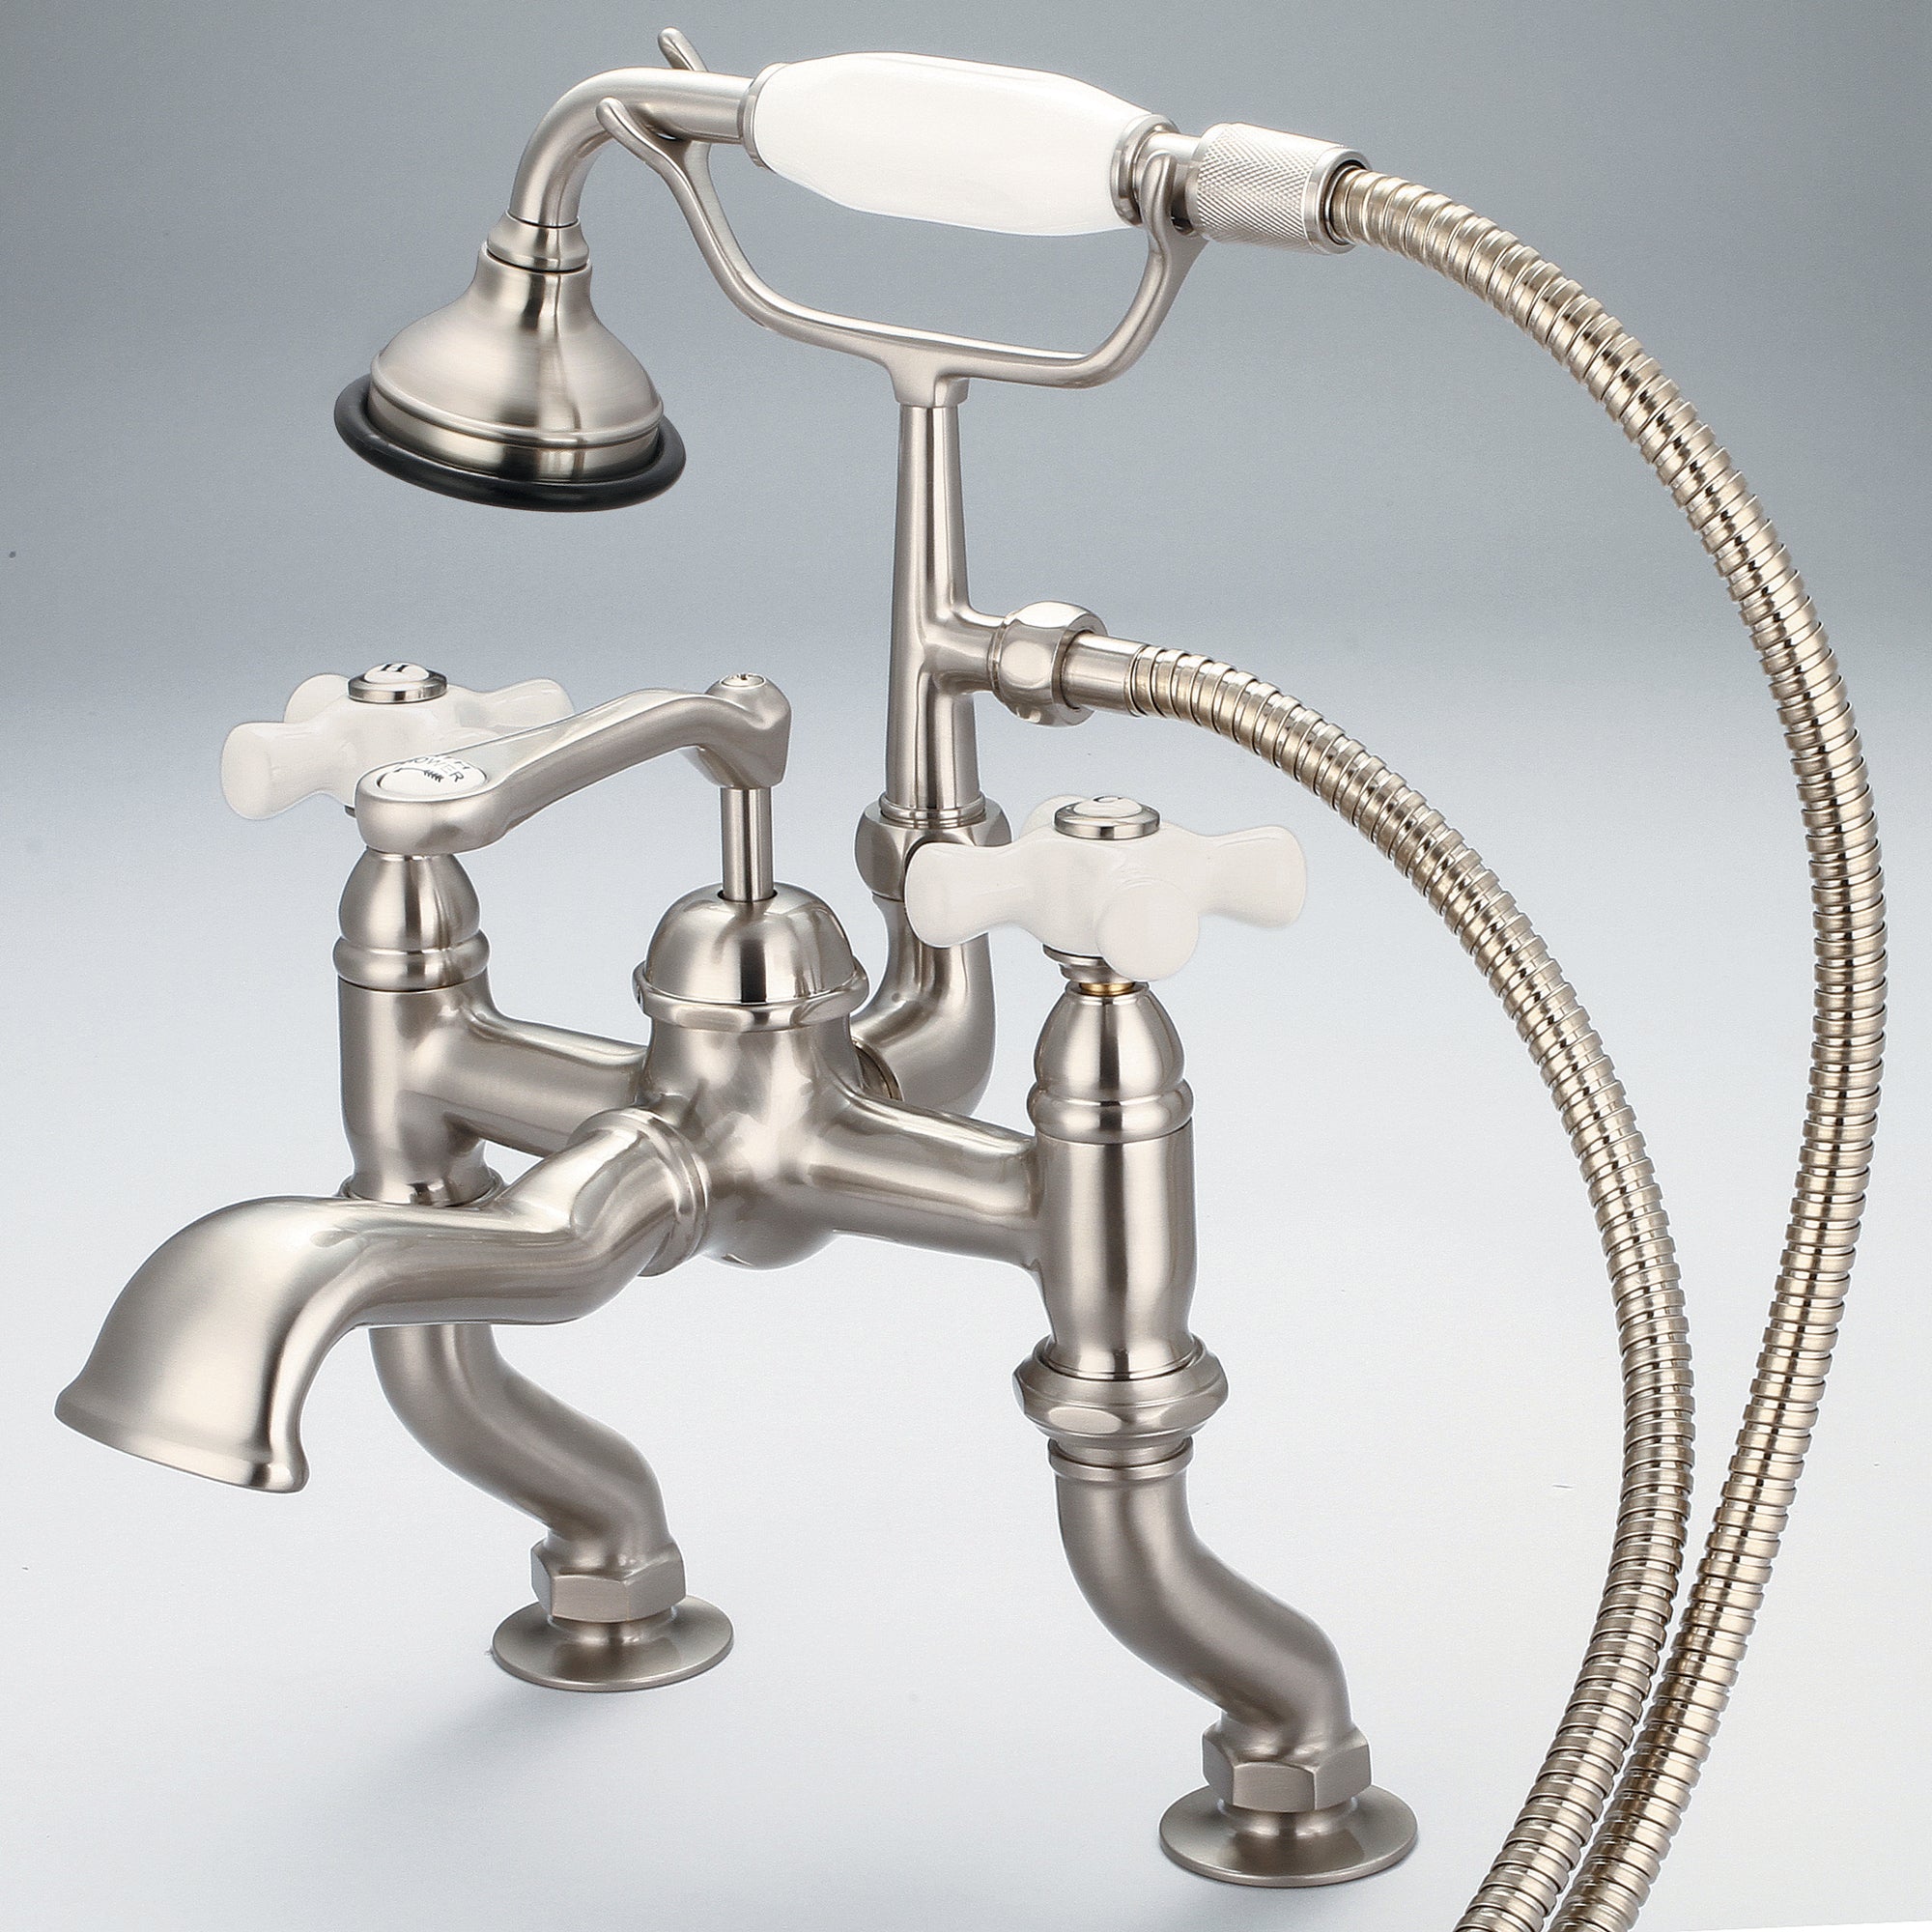 Water Creation | Vintage Classic Adjustable Center Deck Mount Tub Faucet With Handheld Shower in Brushed Nickel Finish With Porcelain Cross Handles, Hot And Cold Labels Included | F6-0004-02-PX